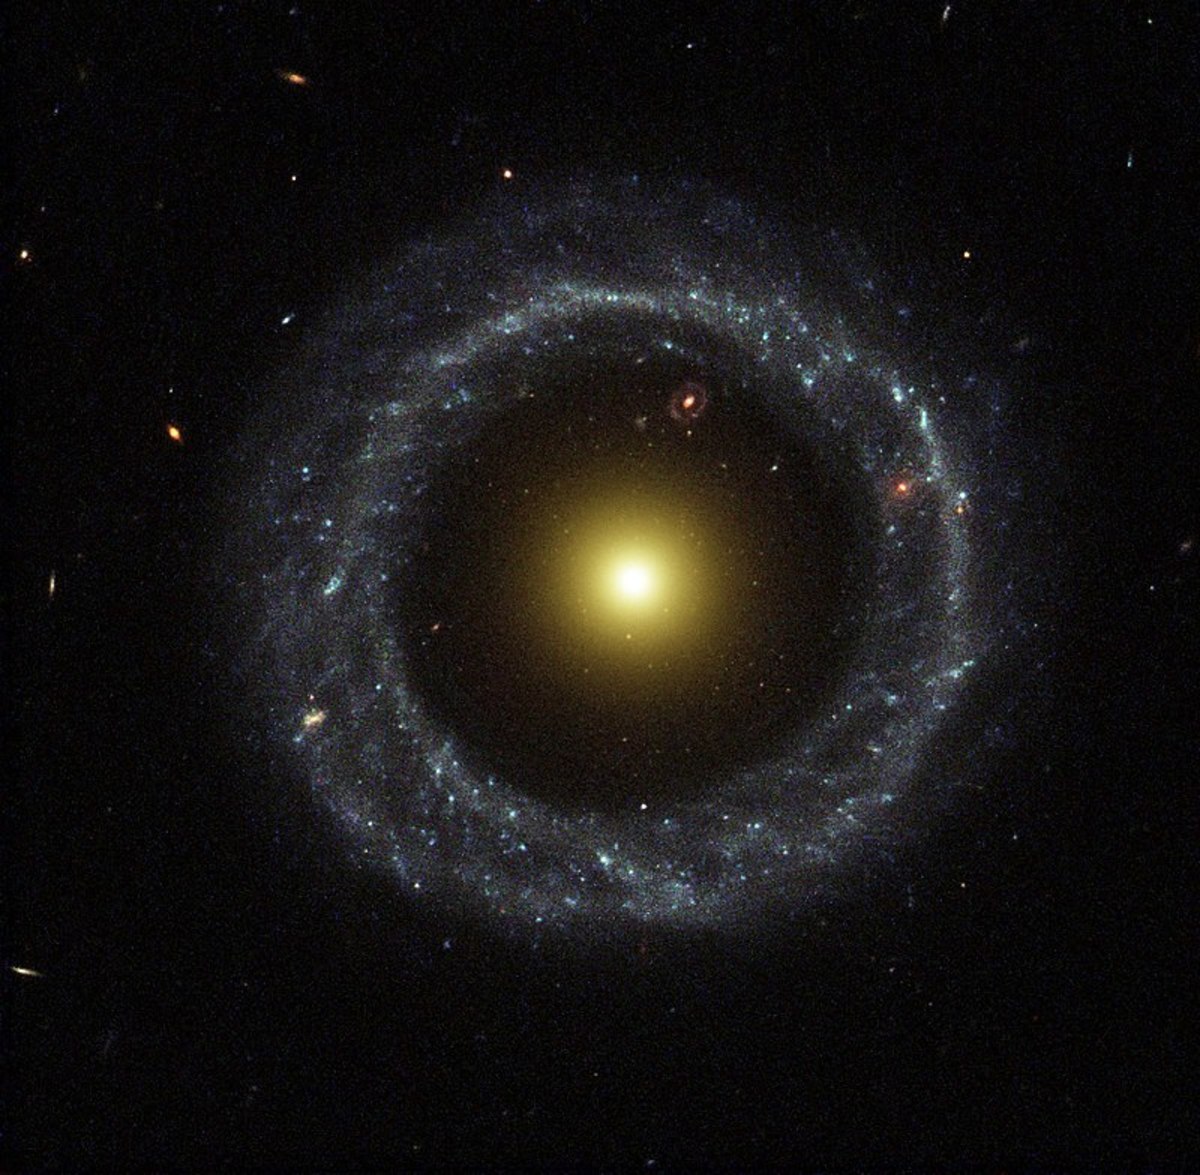 Image from the Hubble Space Telescope of the ring galaxy known as "Hoag's Object."